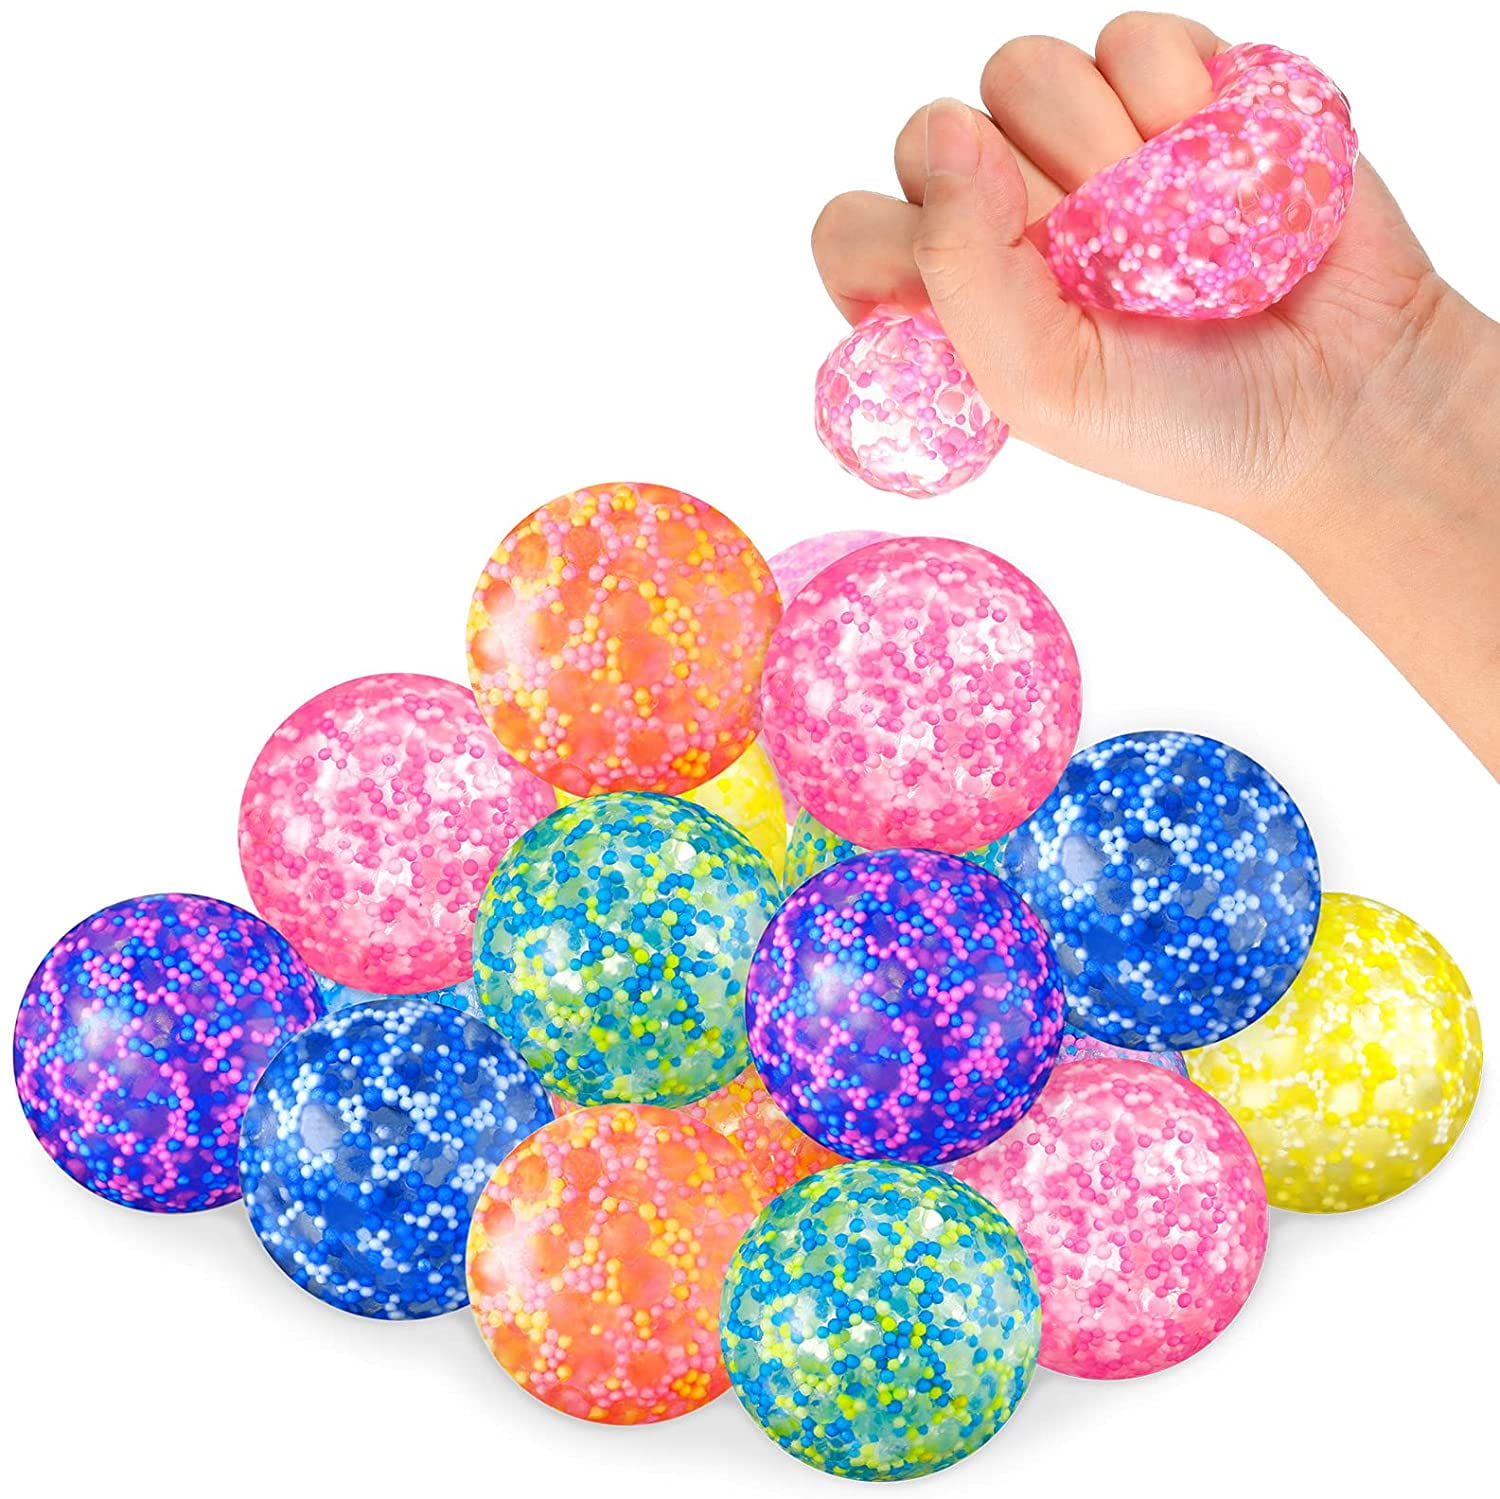 24 Packs Sensory Stress Balls Relief Stress Toys Set With Colorful Beads Rubber Stress Balls 